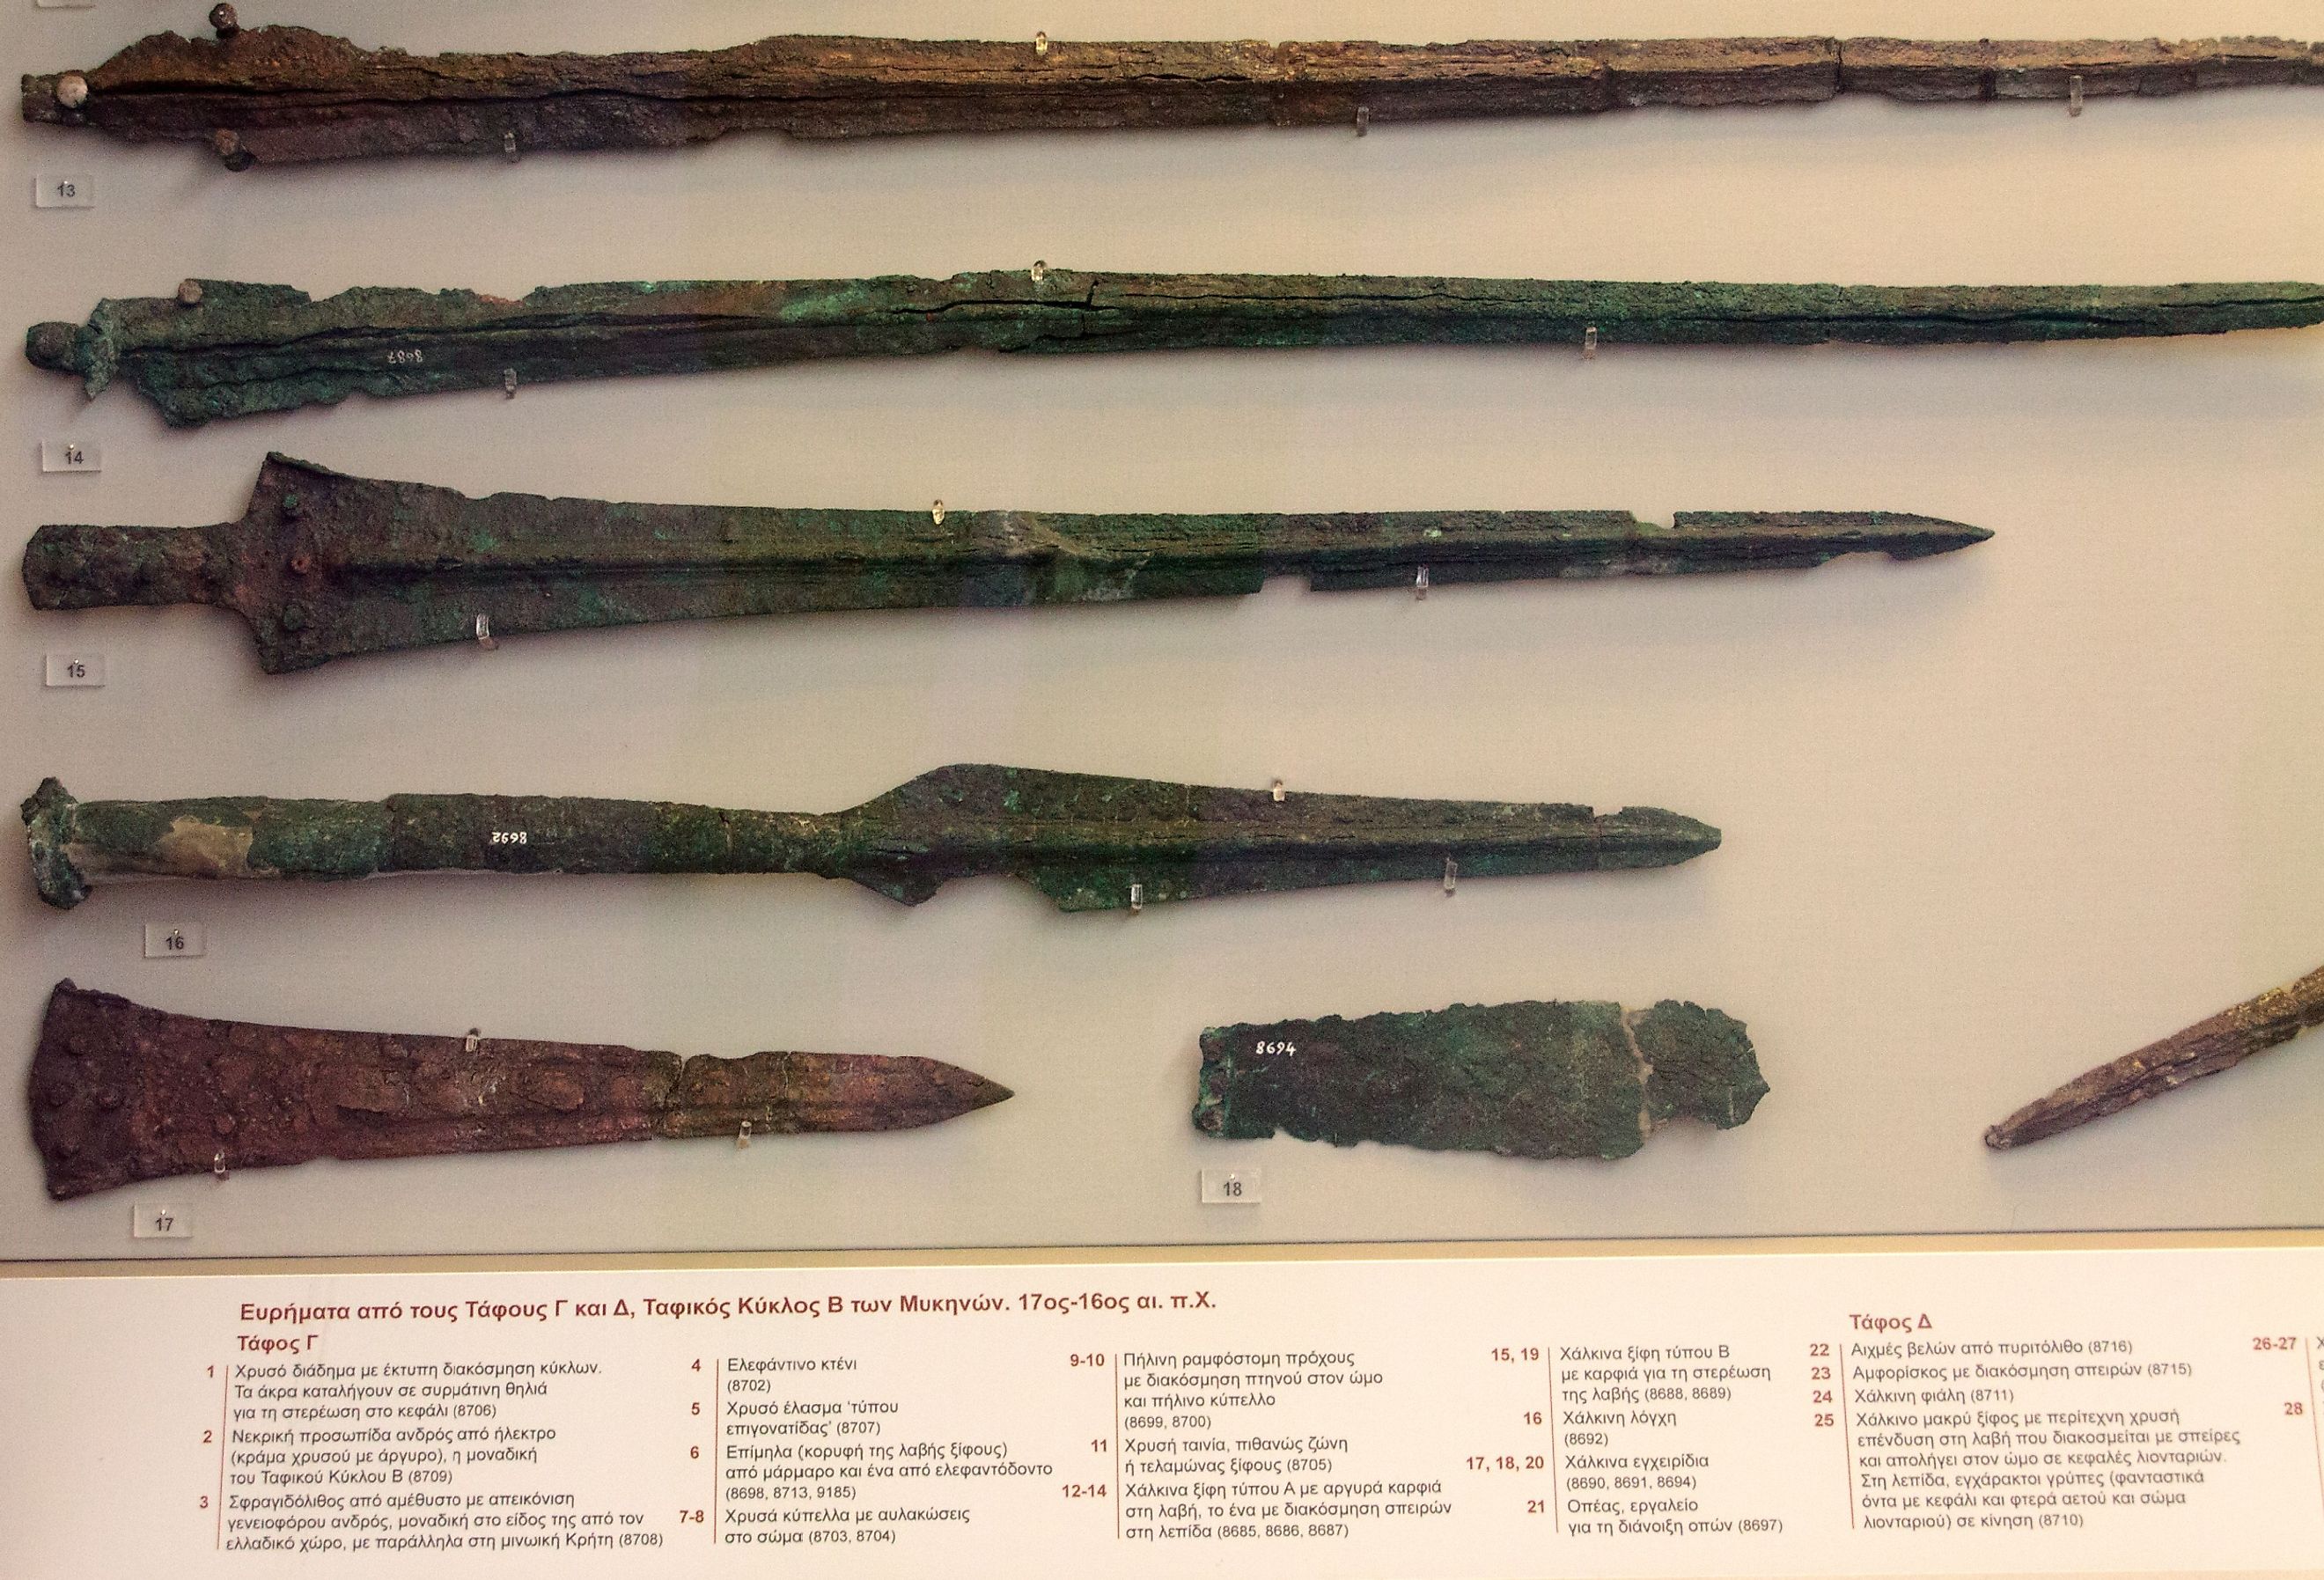 Various weapons of the bronze age found in the tombs of the ancient Mycenae, Athens archaeological museum, Greece. Image credit johzio via Shutterstock.